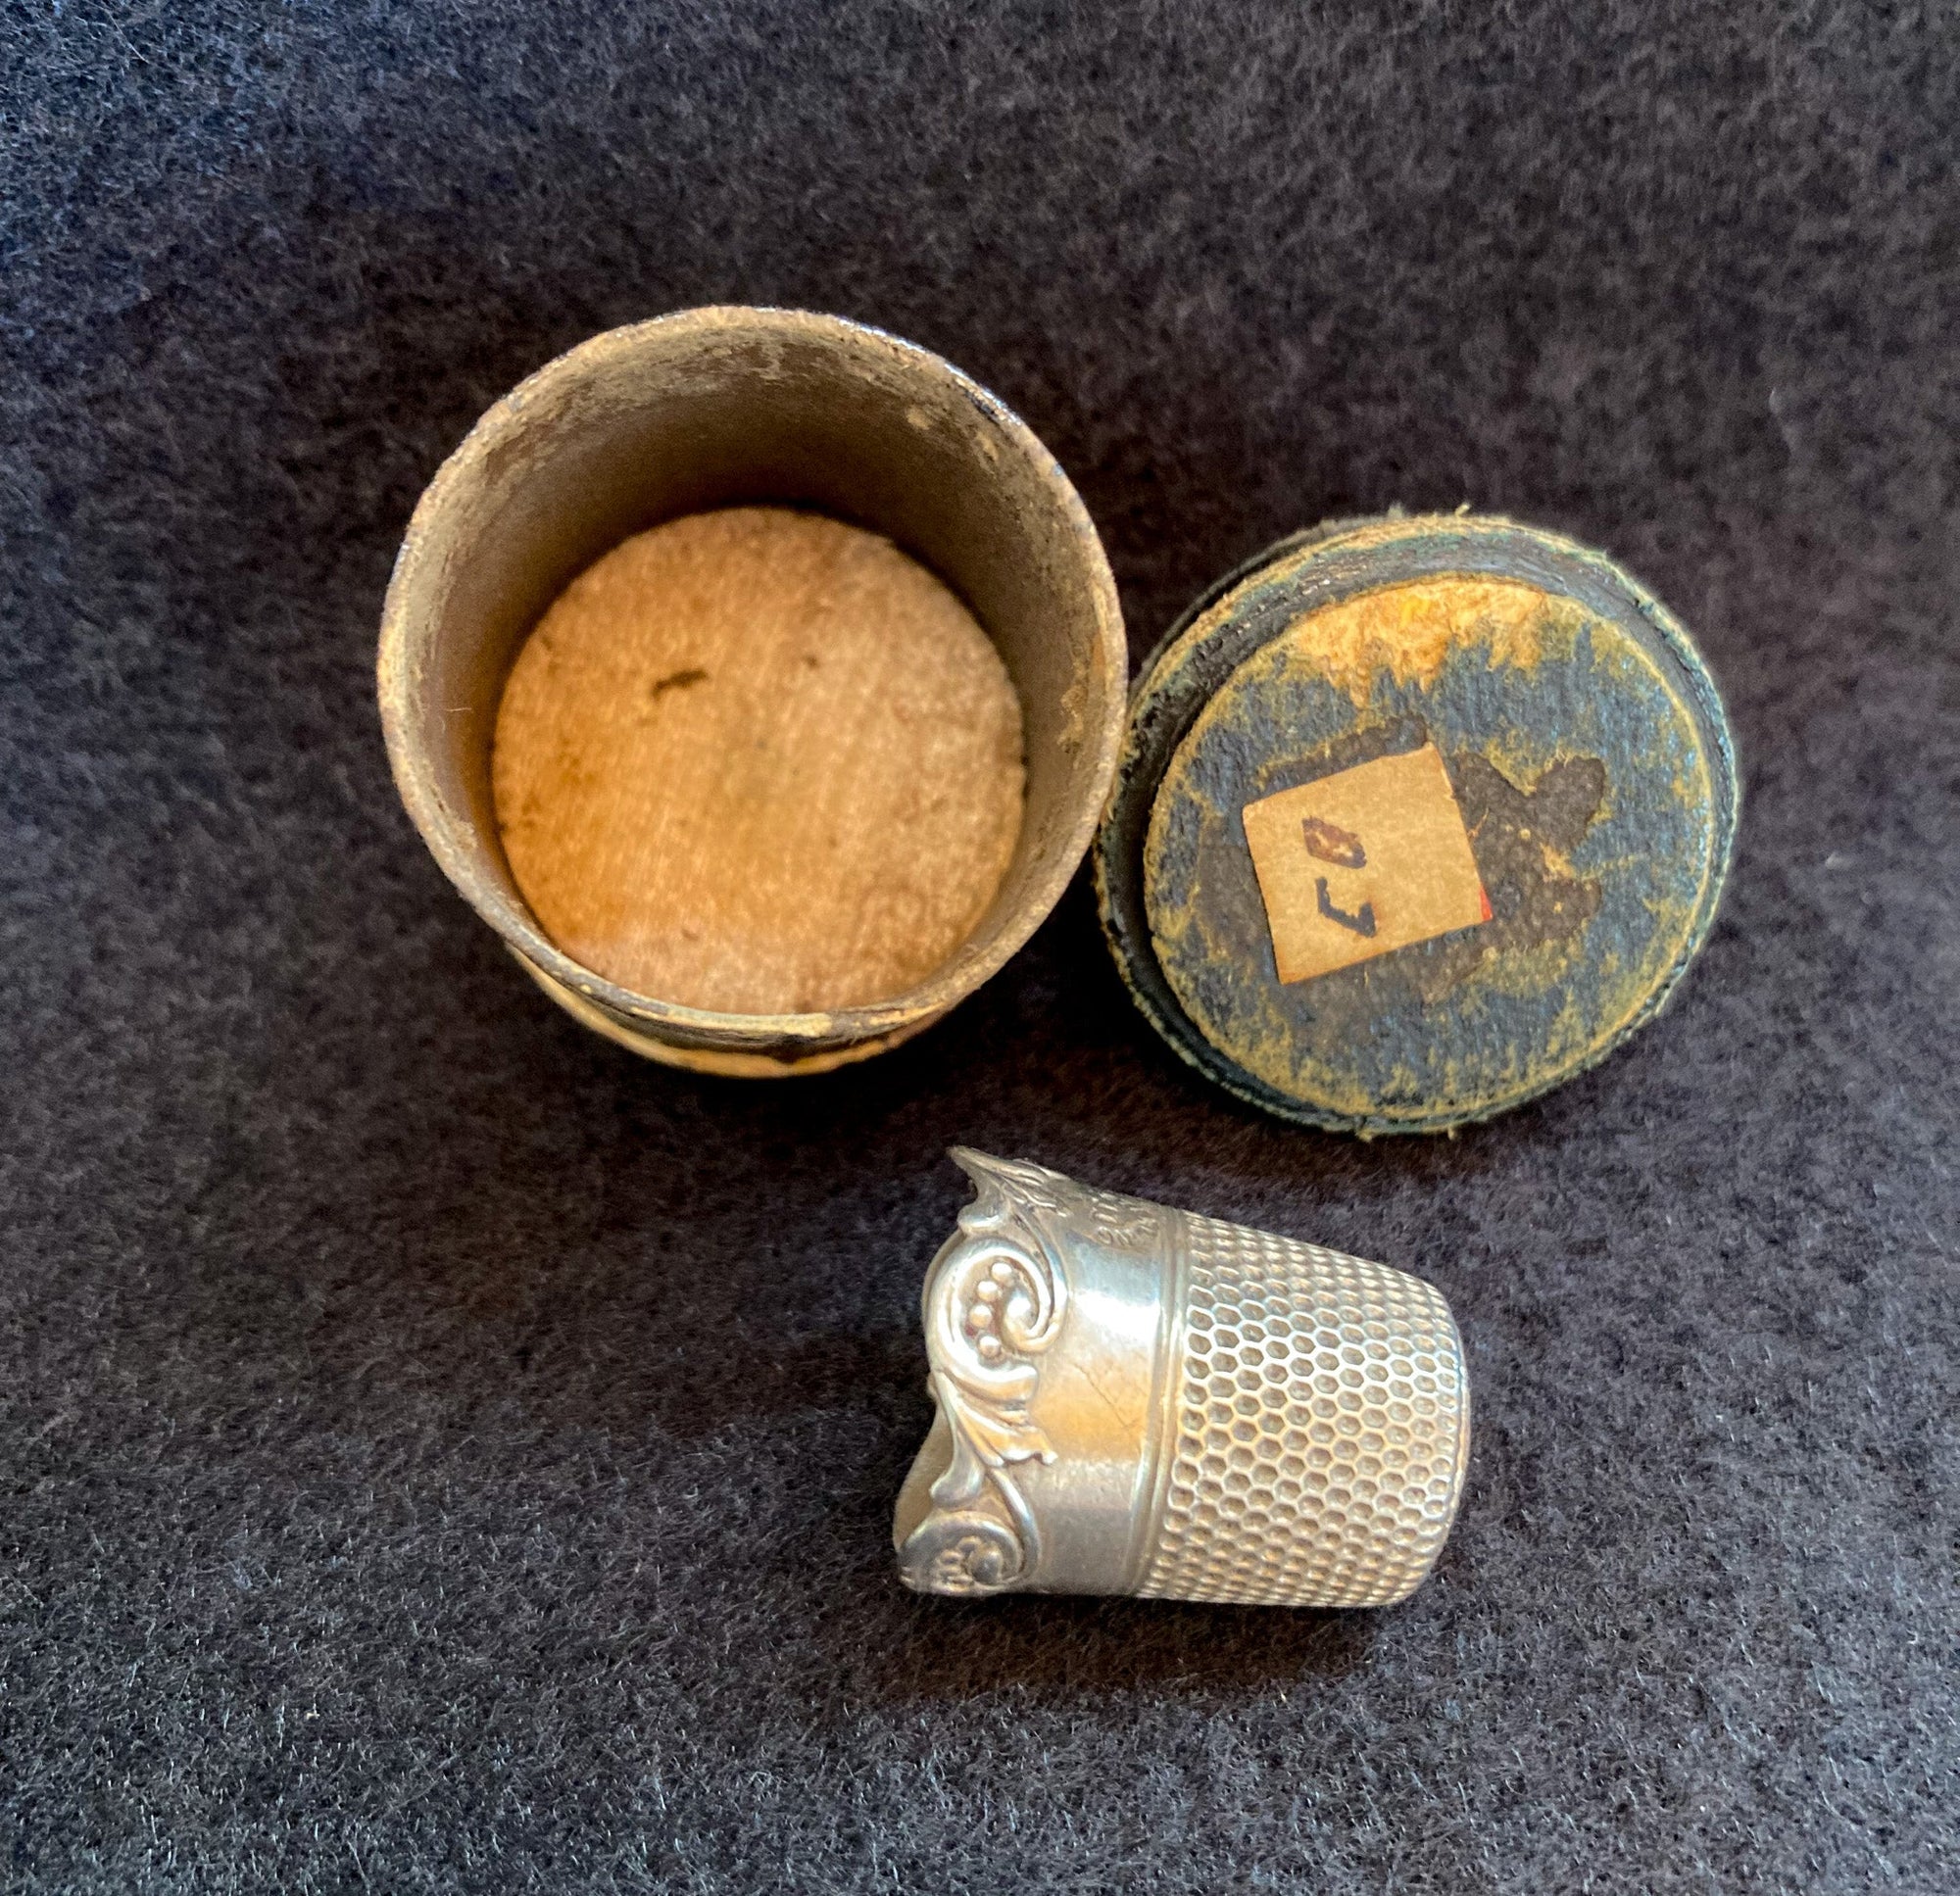 Late 1800’s Sterling Silver Thimble in Original Leather and Velvet Presentation Case